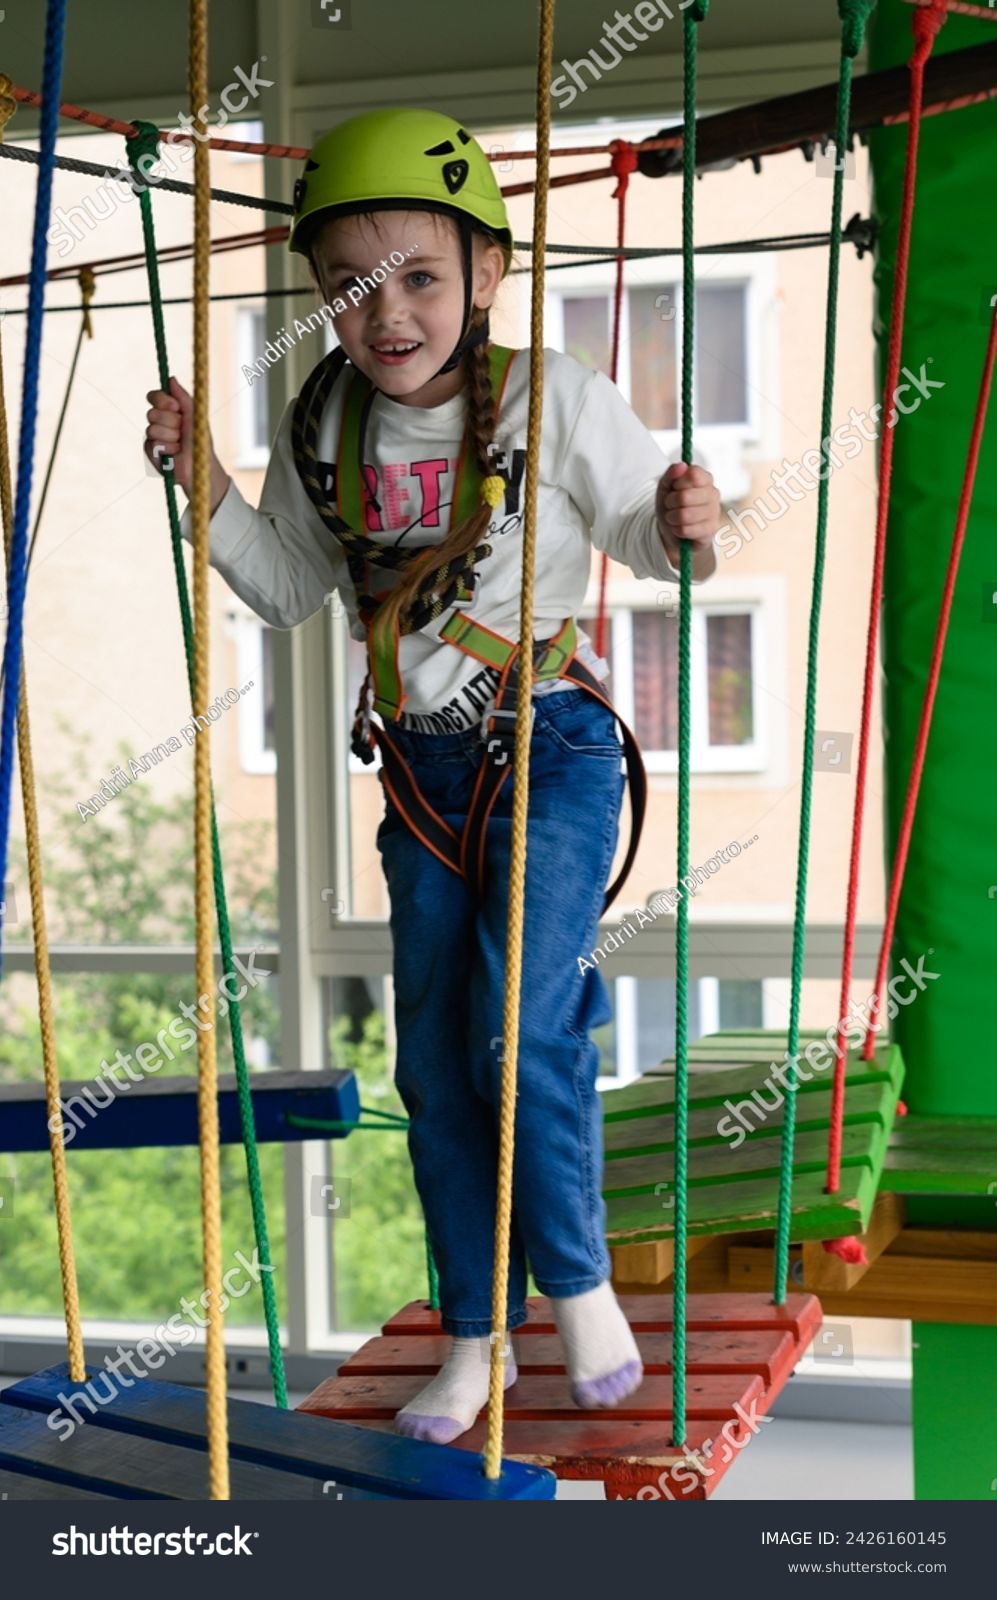 Children's cableway in the playroom, little girl passes the cableway, active and physical development of the child. #2426160145